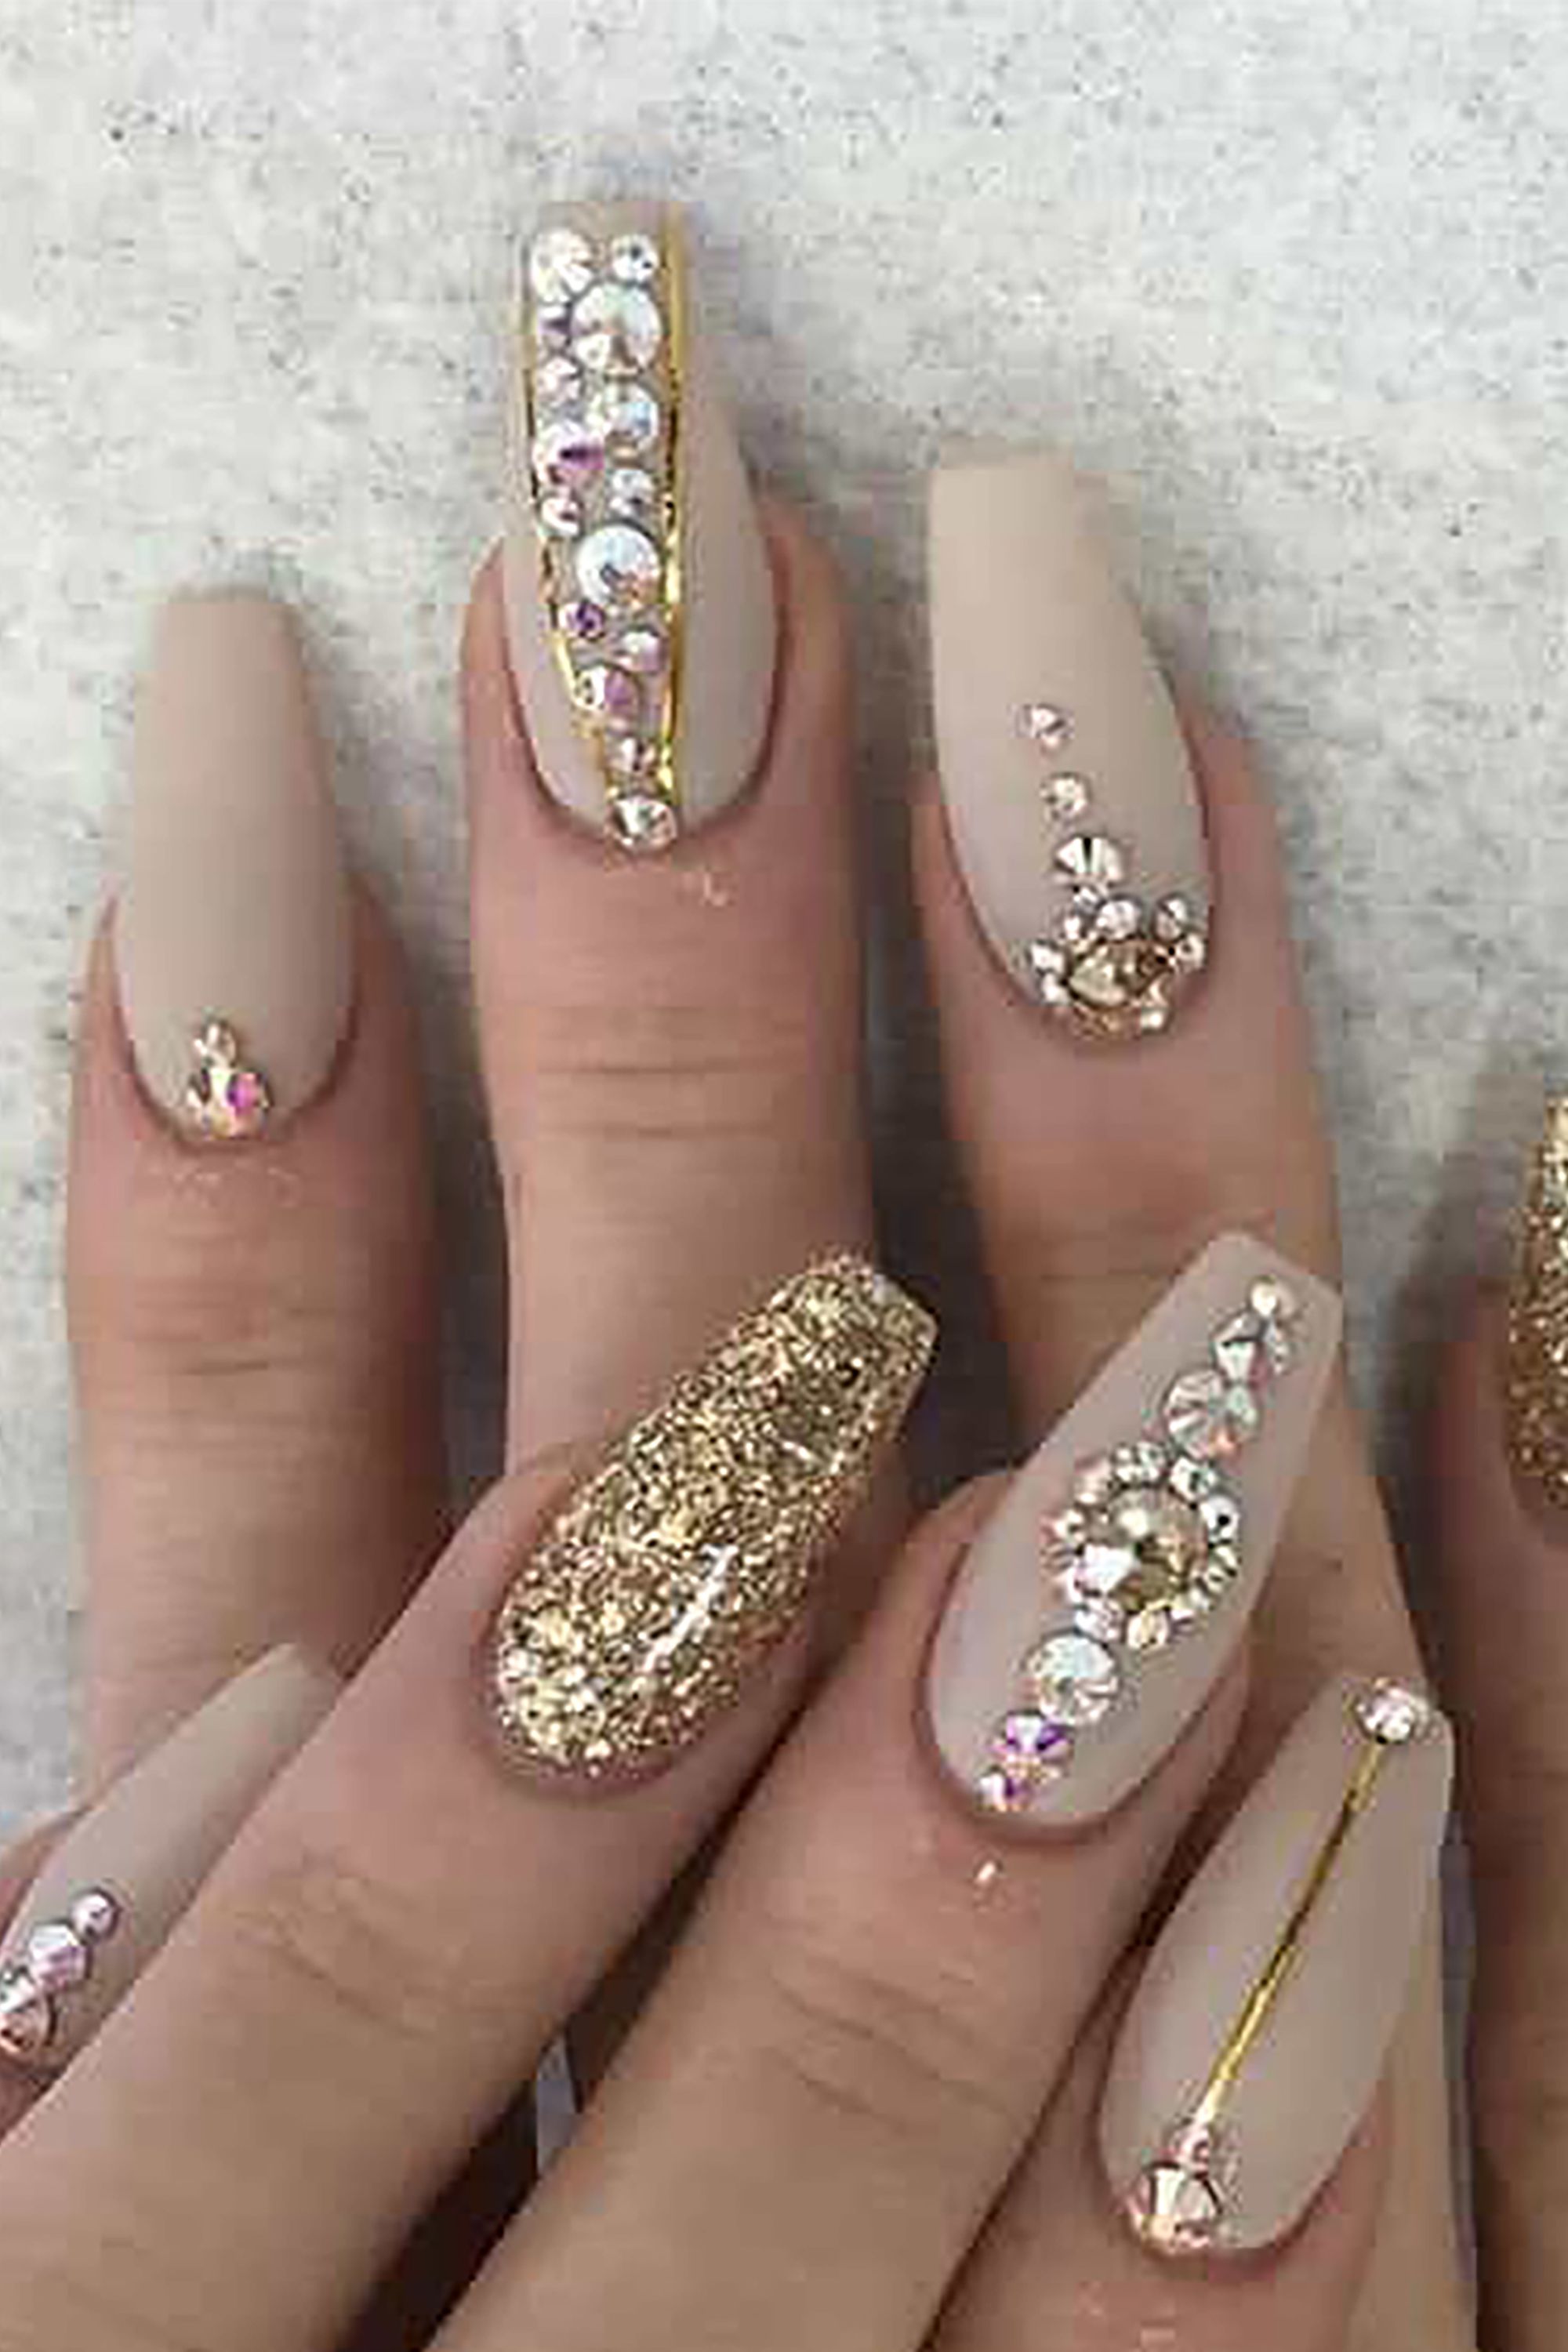 gel nails pictures